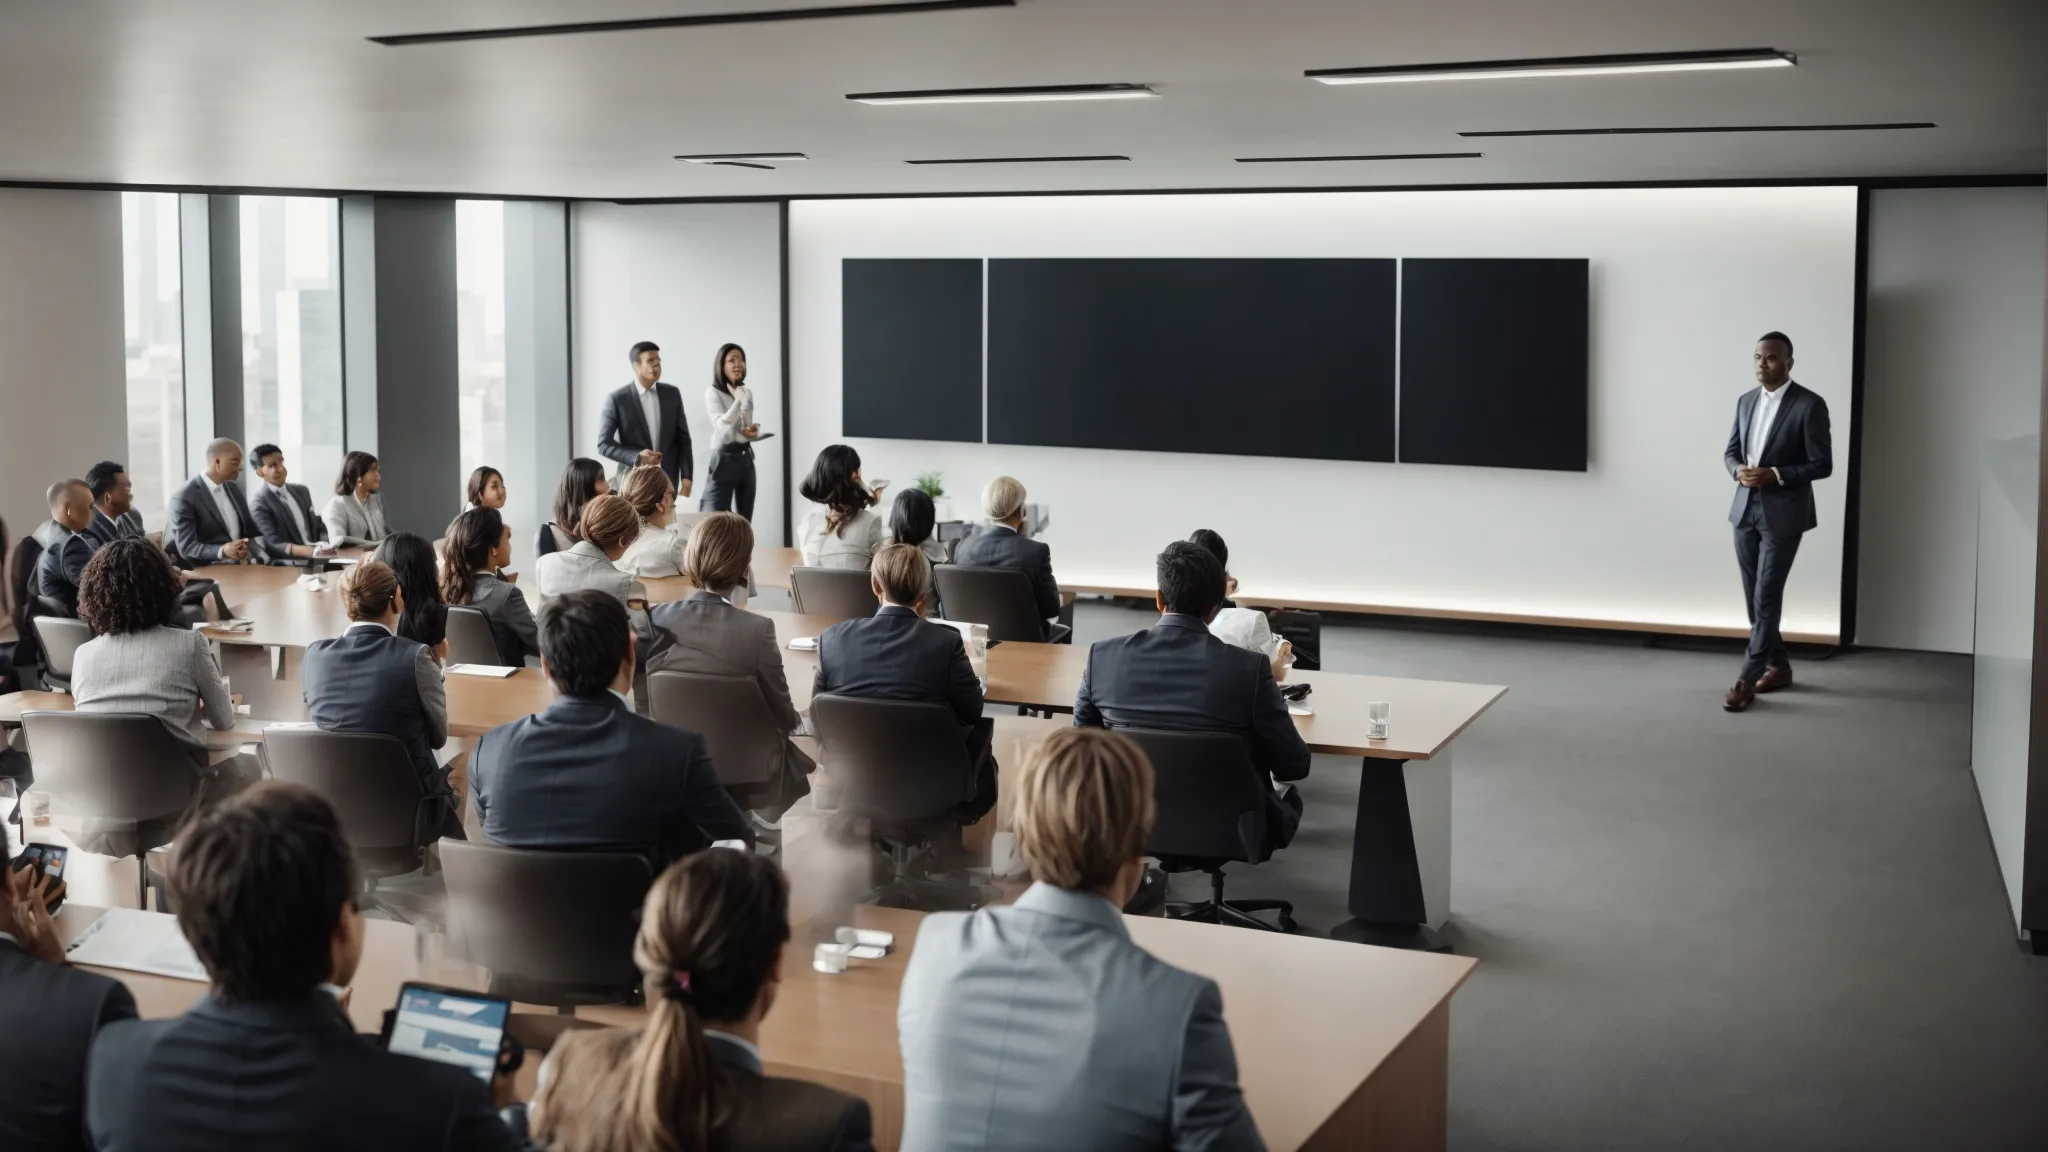 a diverse group of attentive adults gathers in a modern conference room, with a visible presentation screen showcasing marketing strategies.